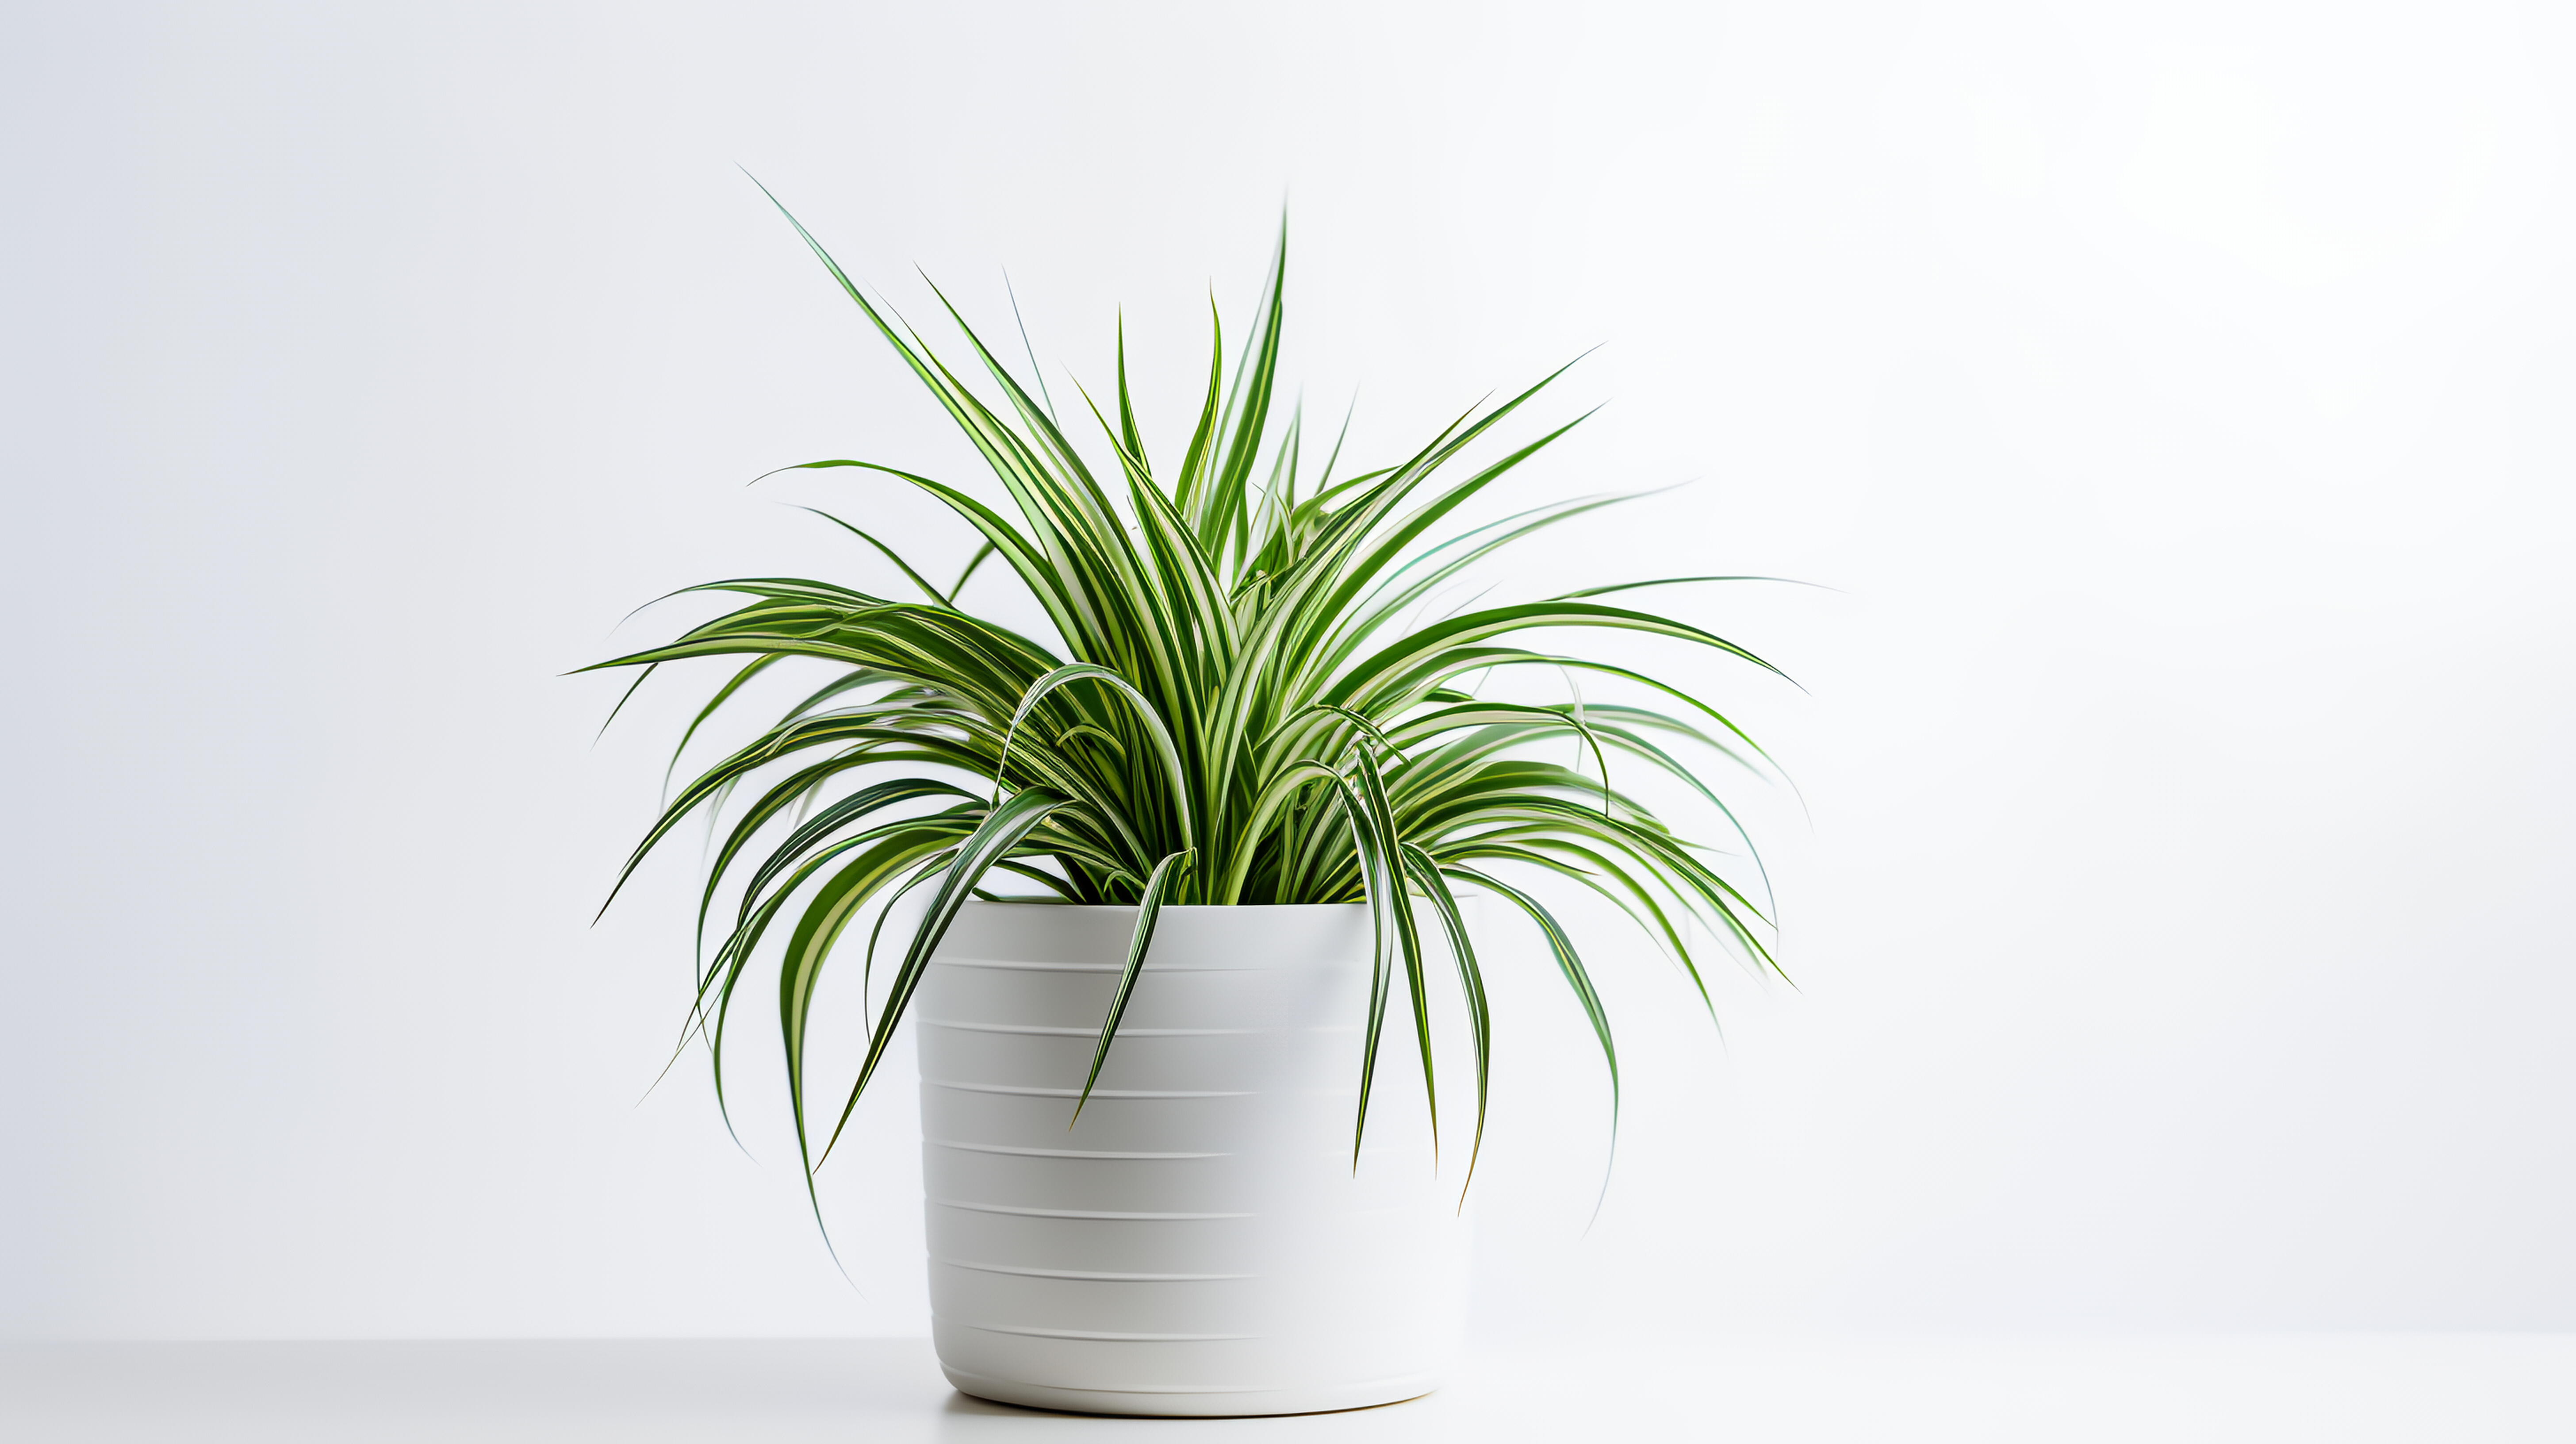 Spider Plant: Air-purifying greenery, ideal for bedroom decor and a serene ambiance.